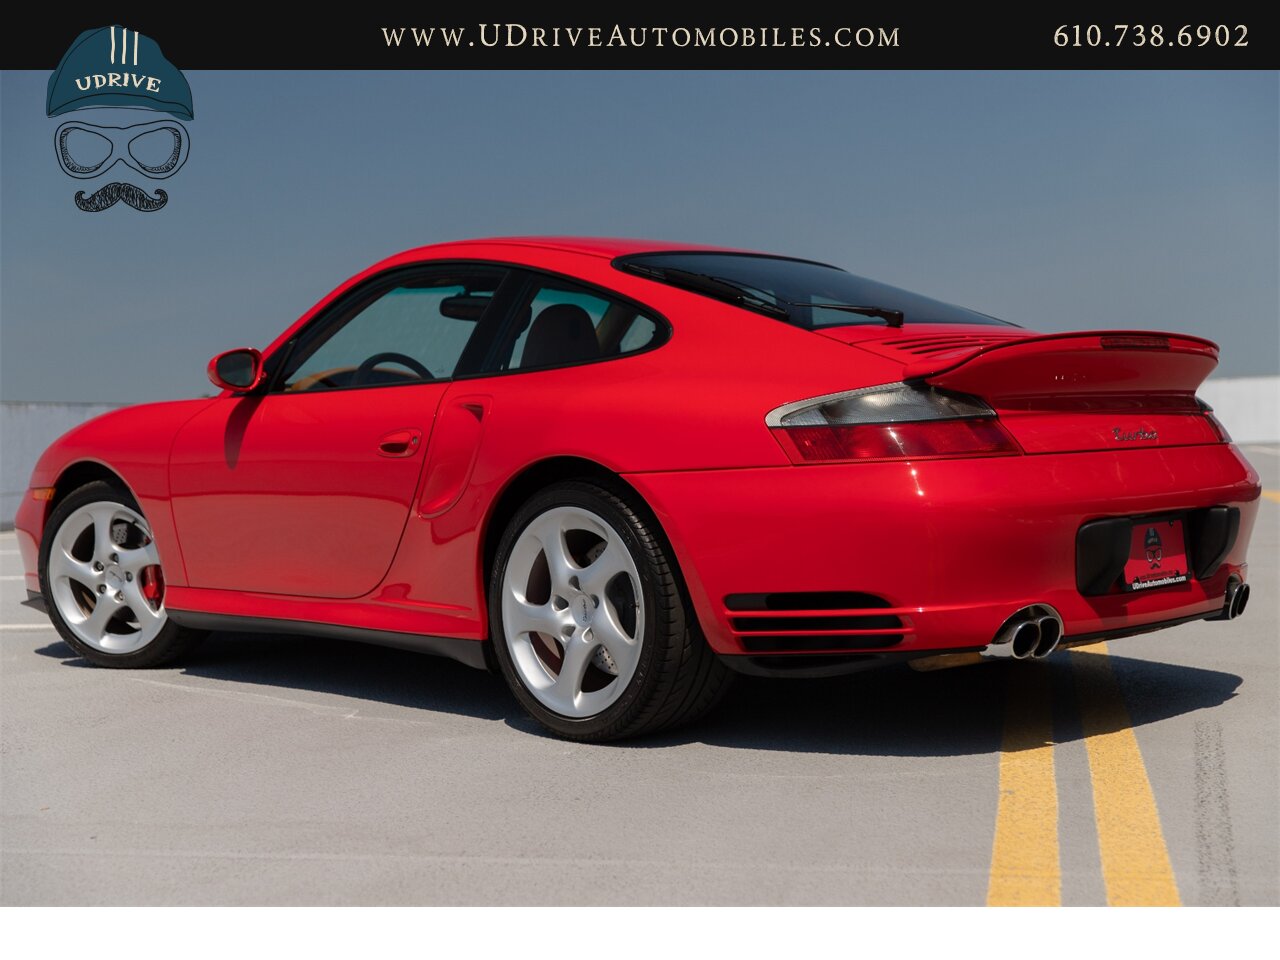 2003 Porsche 911 Turbo 996 Turbo X50 Power Kit 6 Speed Manual  Rare Color Guards Red over Brown Natural Leather - Photo 6 - West Chester, PA 19382